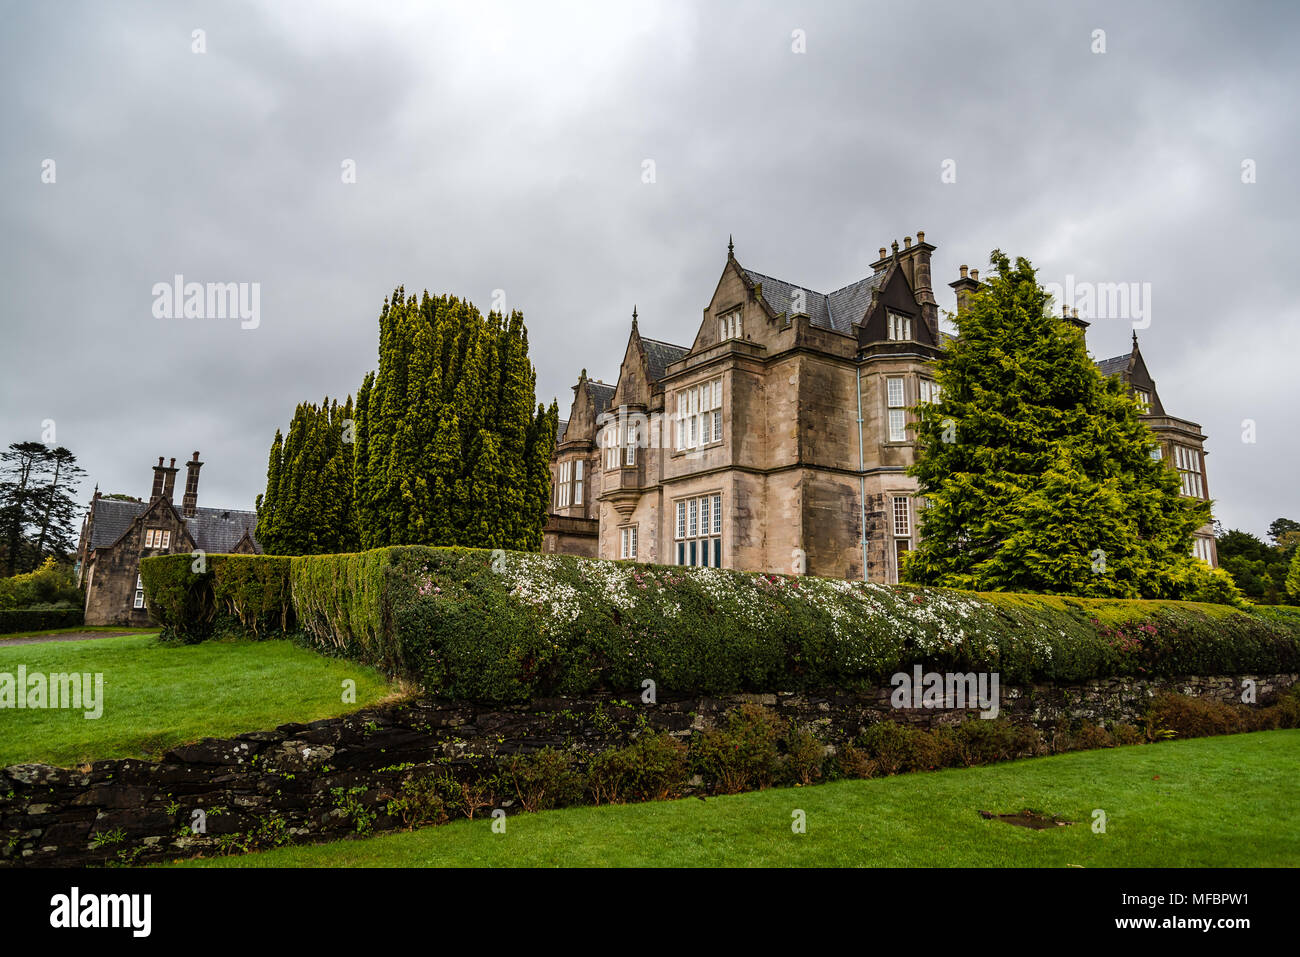 Killarney, Ireland - November 11, 2017: Muckross House and gardens against cloudy sky. It is a mansion designed in Tudor style, located in the The Nat Stock Photo